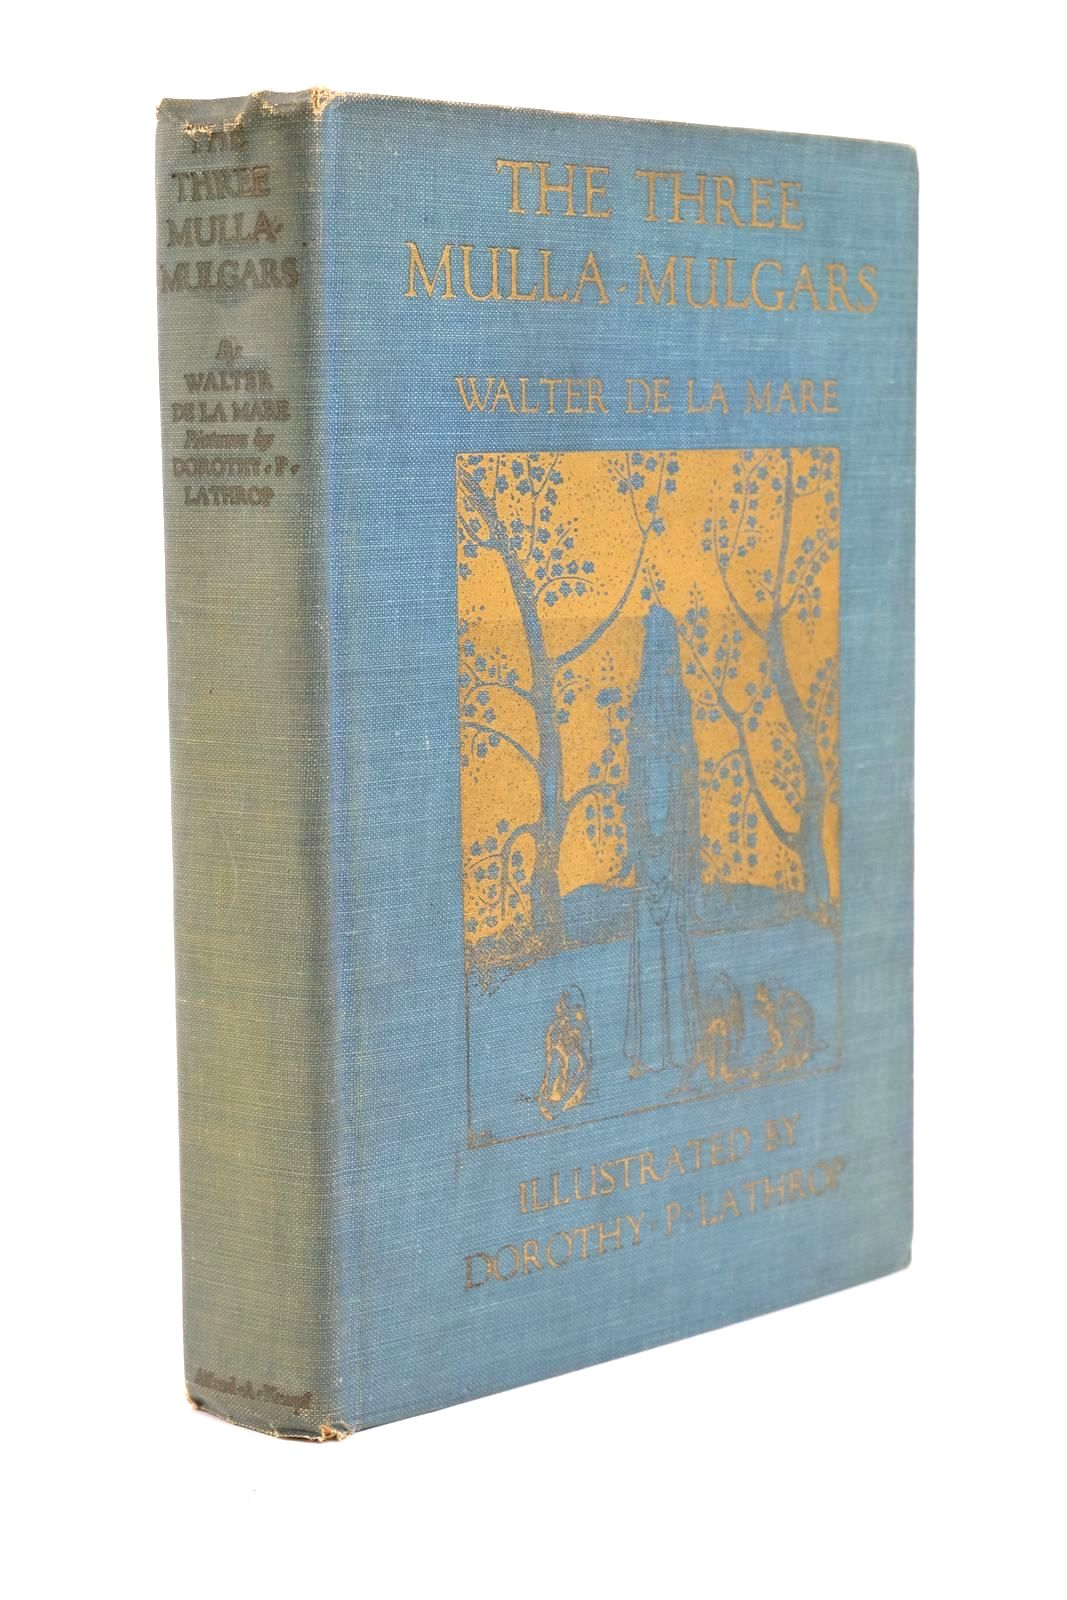 Photo of THE THREE MULLA-MULGARS written by De La Mare, Walter illustrated by Lathrop, Dorothy P. published by Alfred A. Knopf (STOCK CODE: 1322971)  for sale by Stella & Rose's Books